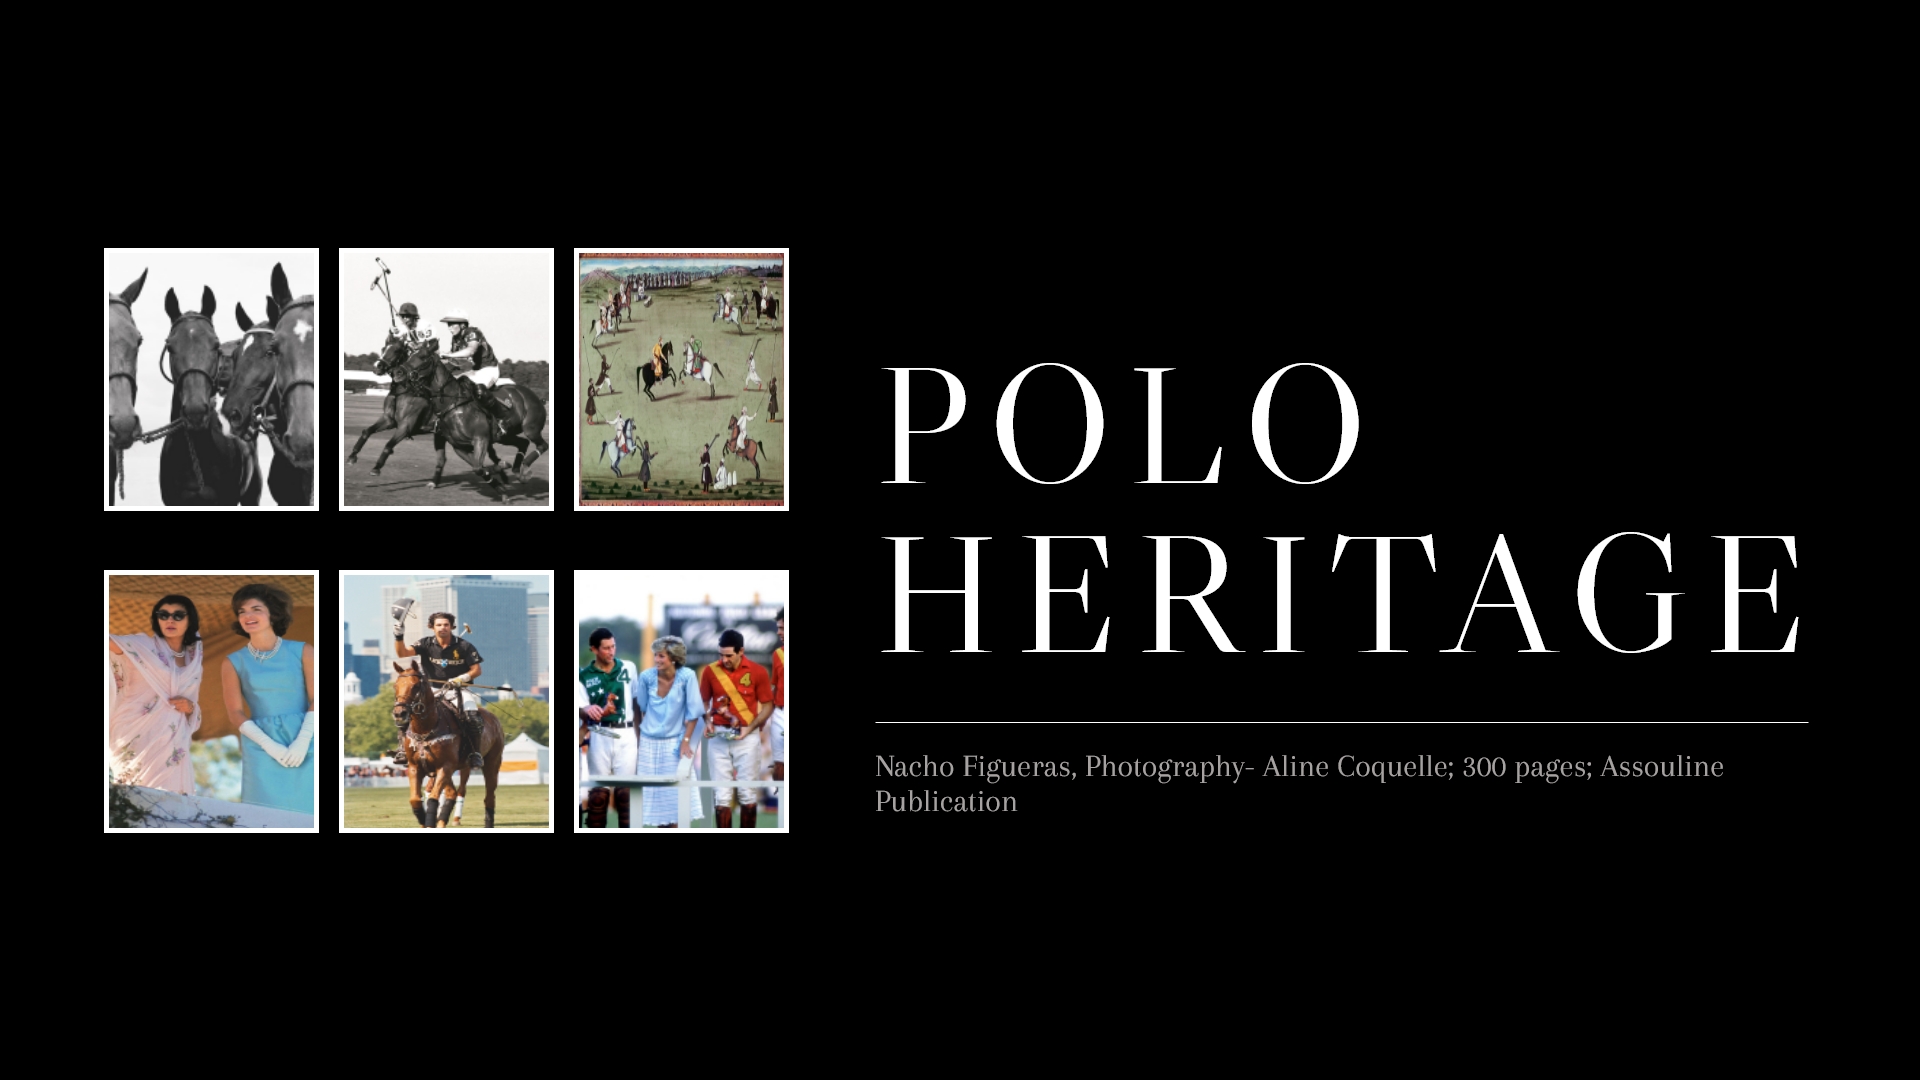 Polo through the realms of time and space